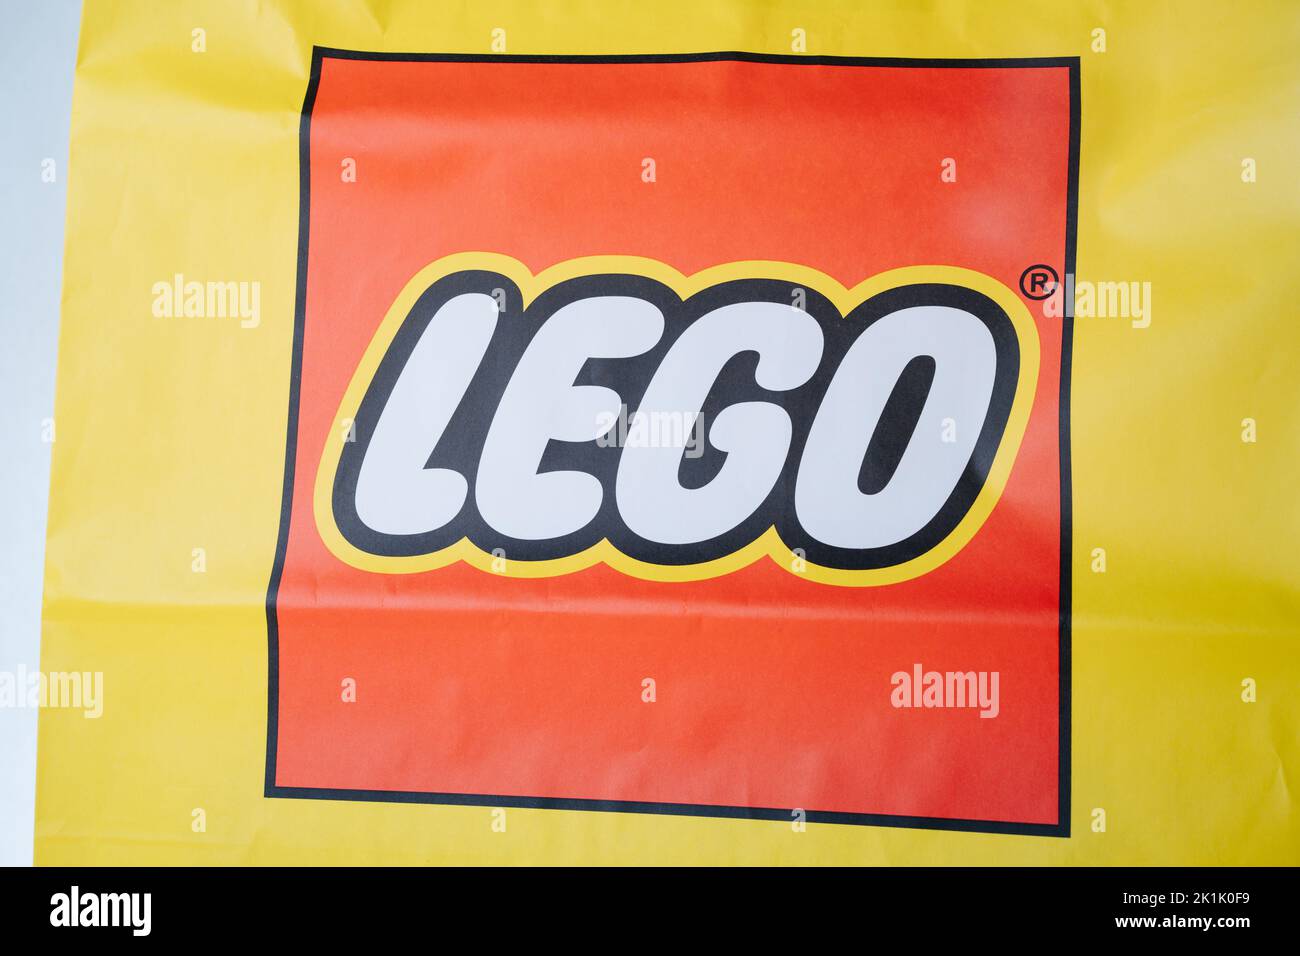 Square red lego logo on a yellow paper bag close up. Stock Photo